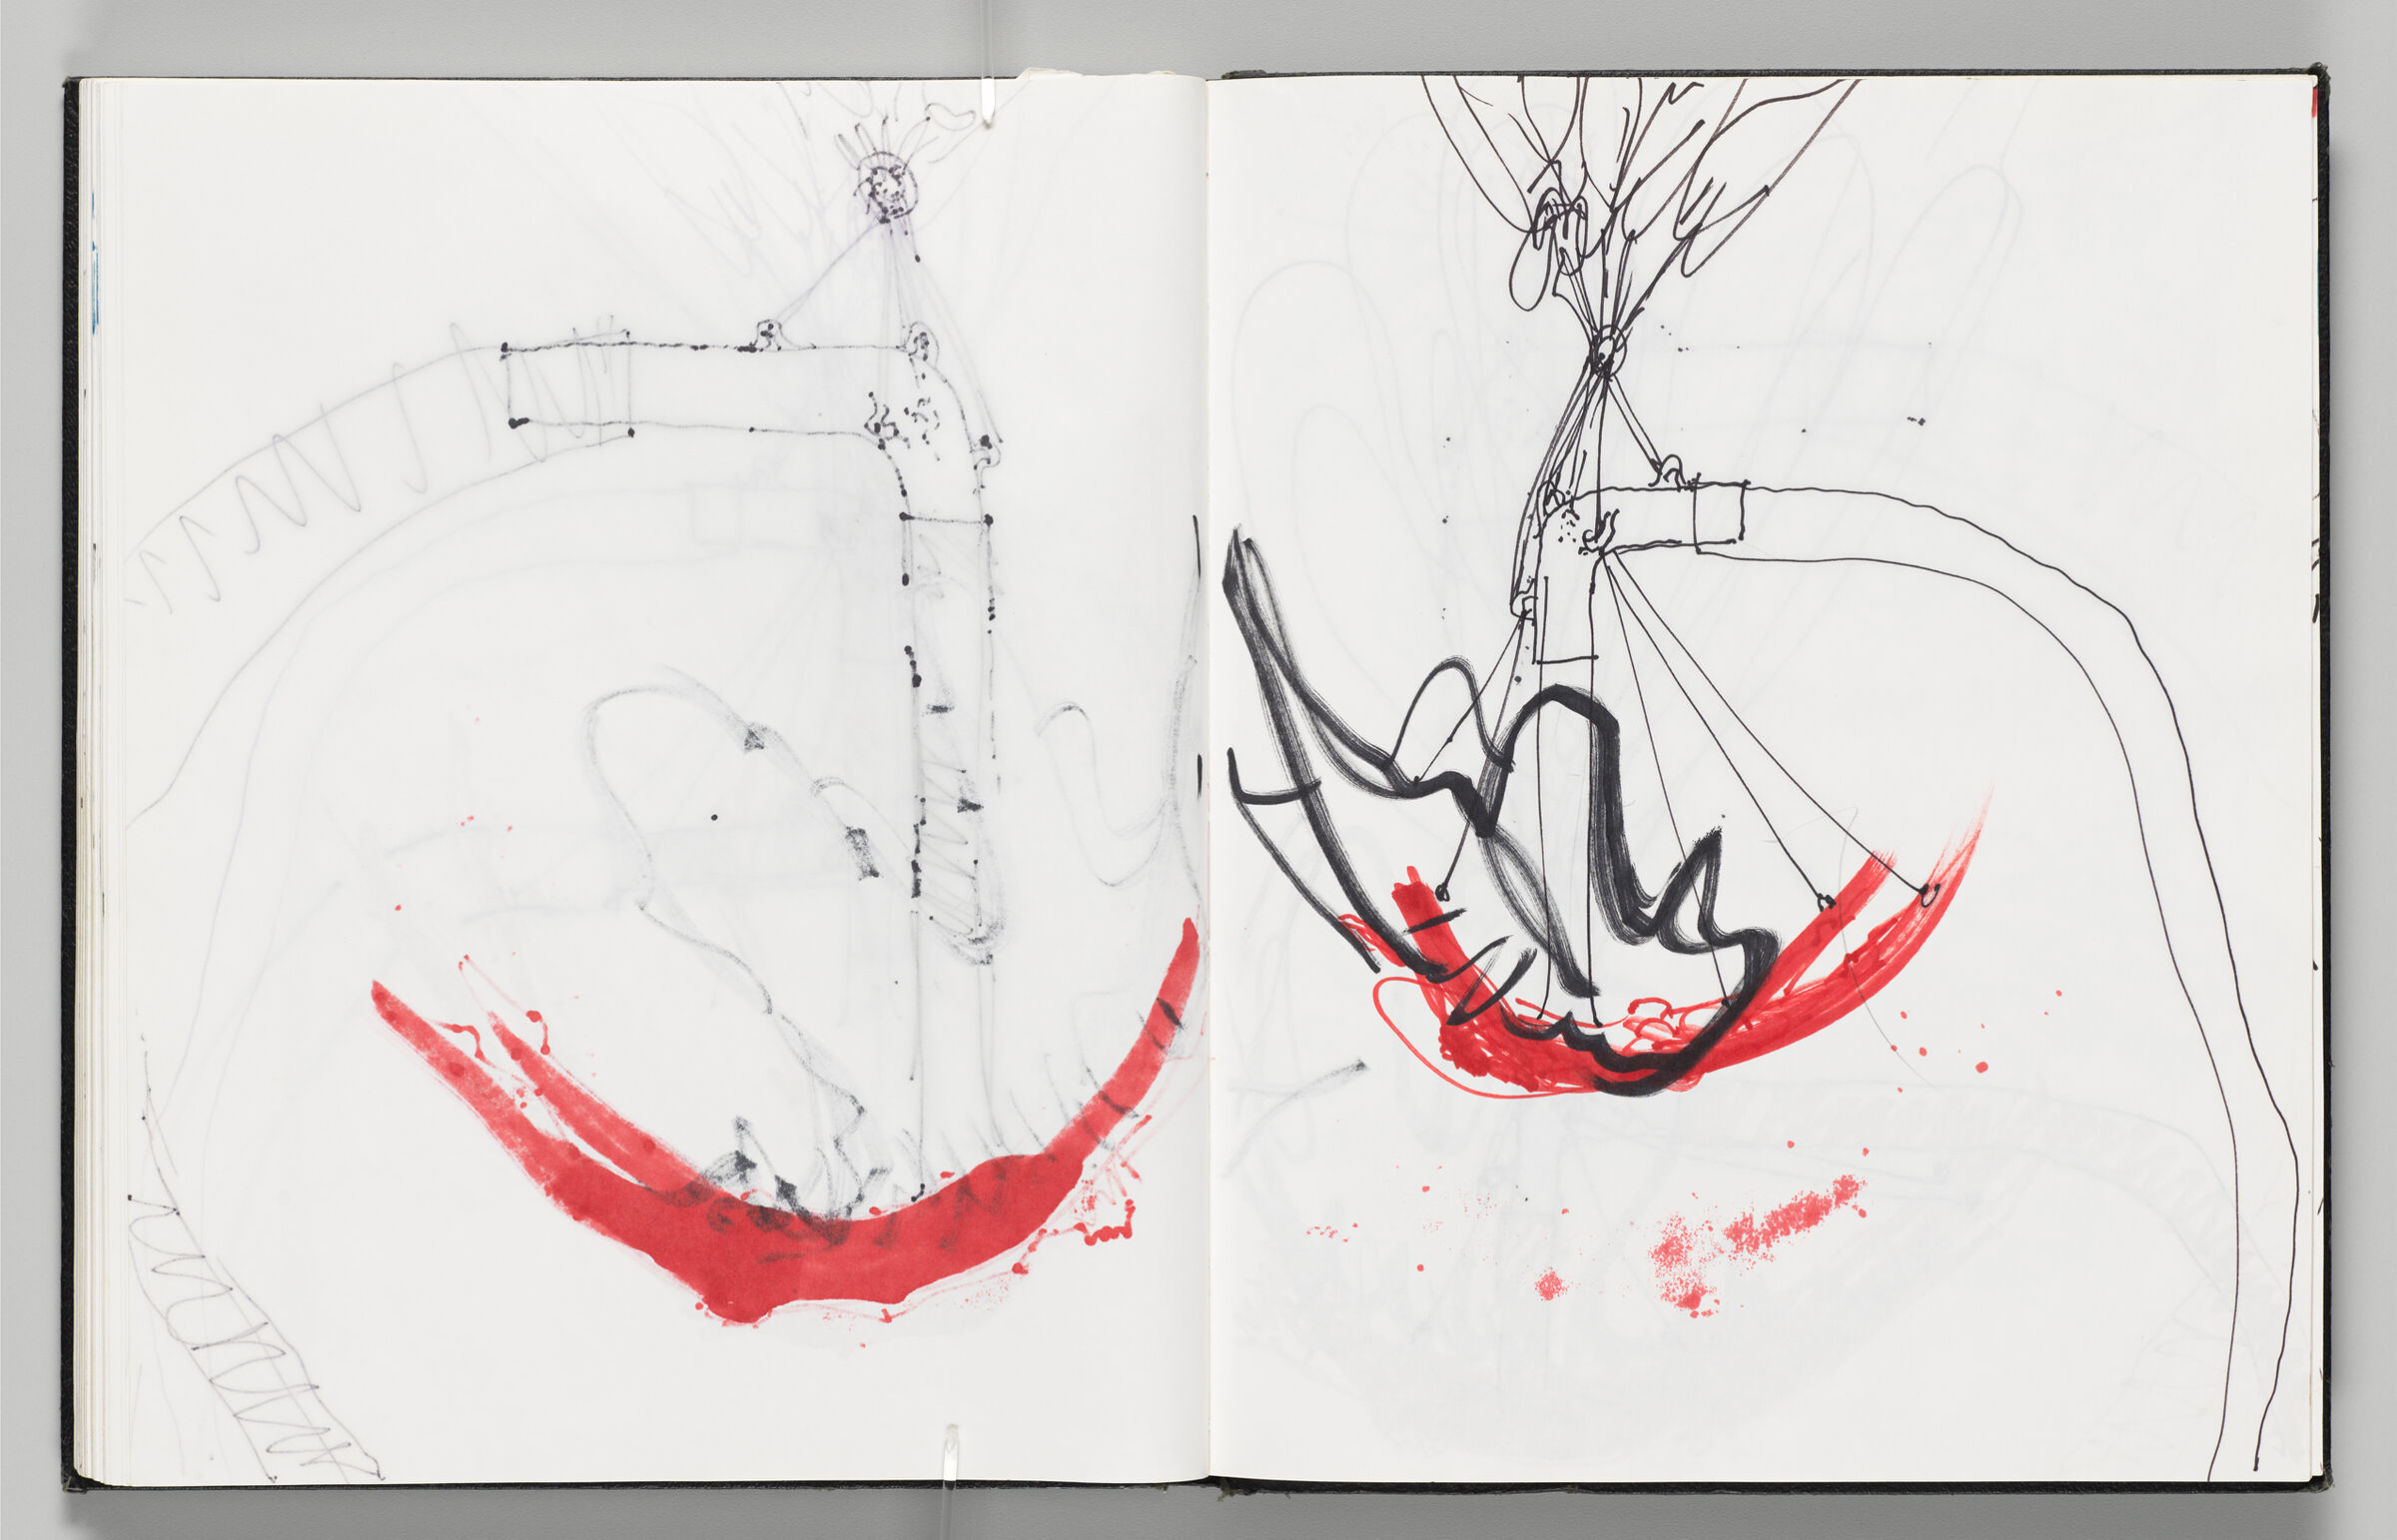 Untitled (Bleed-Through Of Previous Page, Left Page); Untitled (Sketch Of Icarus And Mapping Of Inflatable Locations With Faint Color Transfer, Right Page)